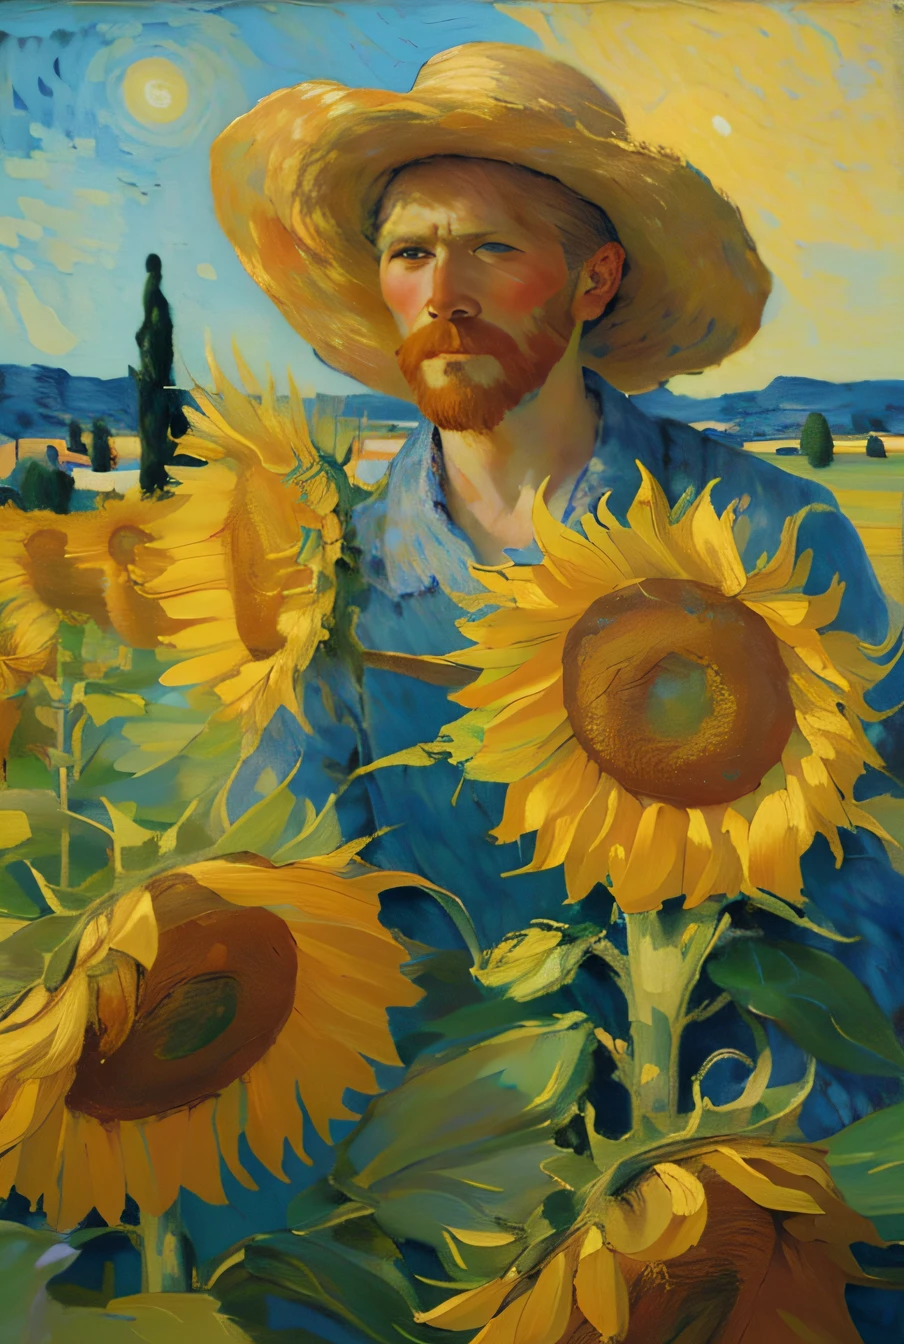 Van Gogh, Straw Hat Hat, vivd colour, himawari, Detailed brush strokes, Impresionismo, self - portrait, swirling sky, Expressive eyes, exquisitedetails, wheat field, Thick textured paint, star night, post impressionist, intense emotions, Rustic charm, Sun-drenched landscape, iconic artist, superb technology